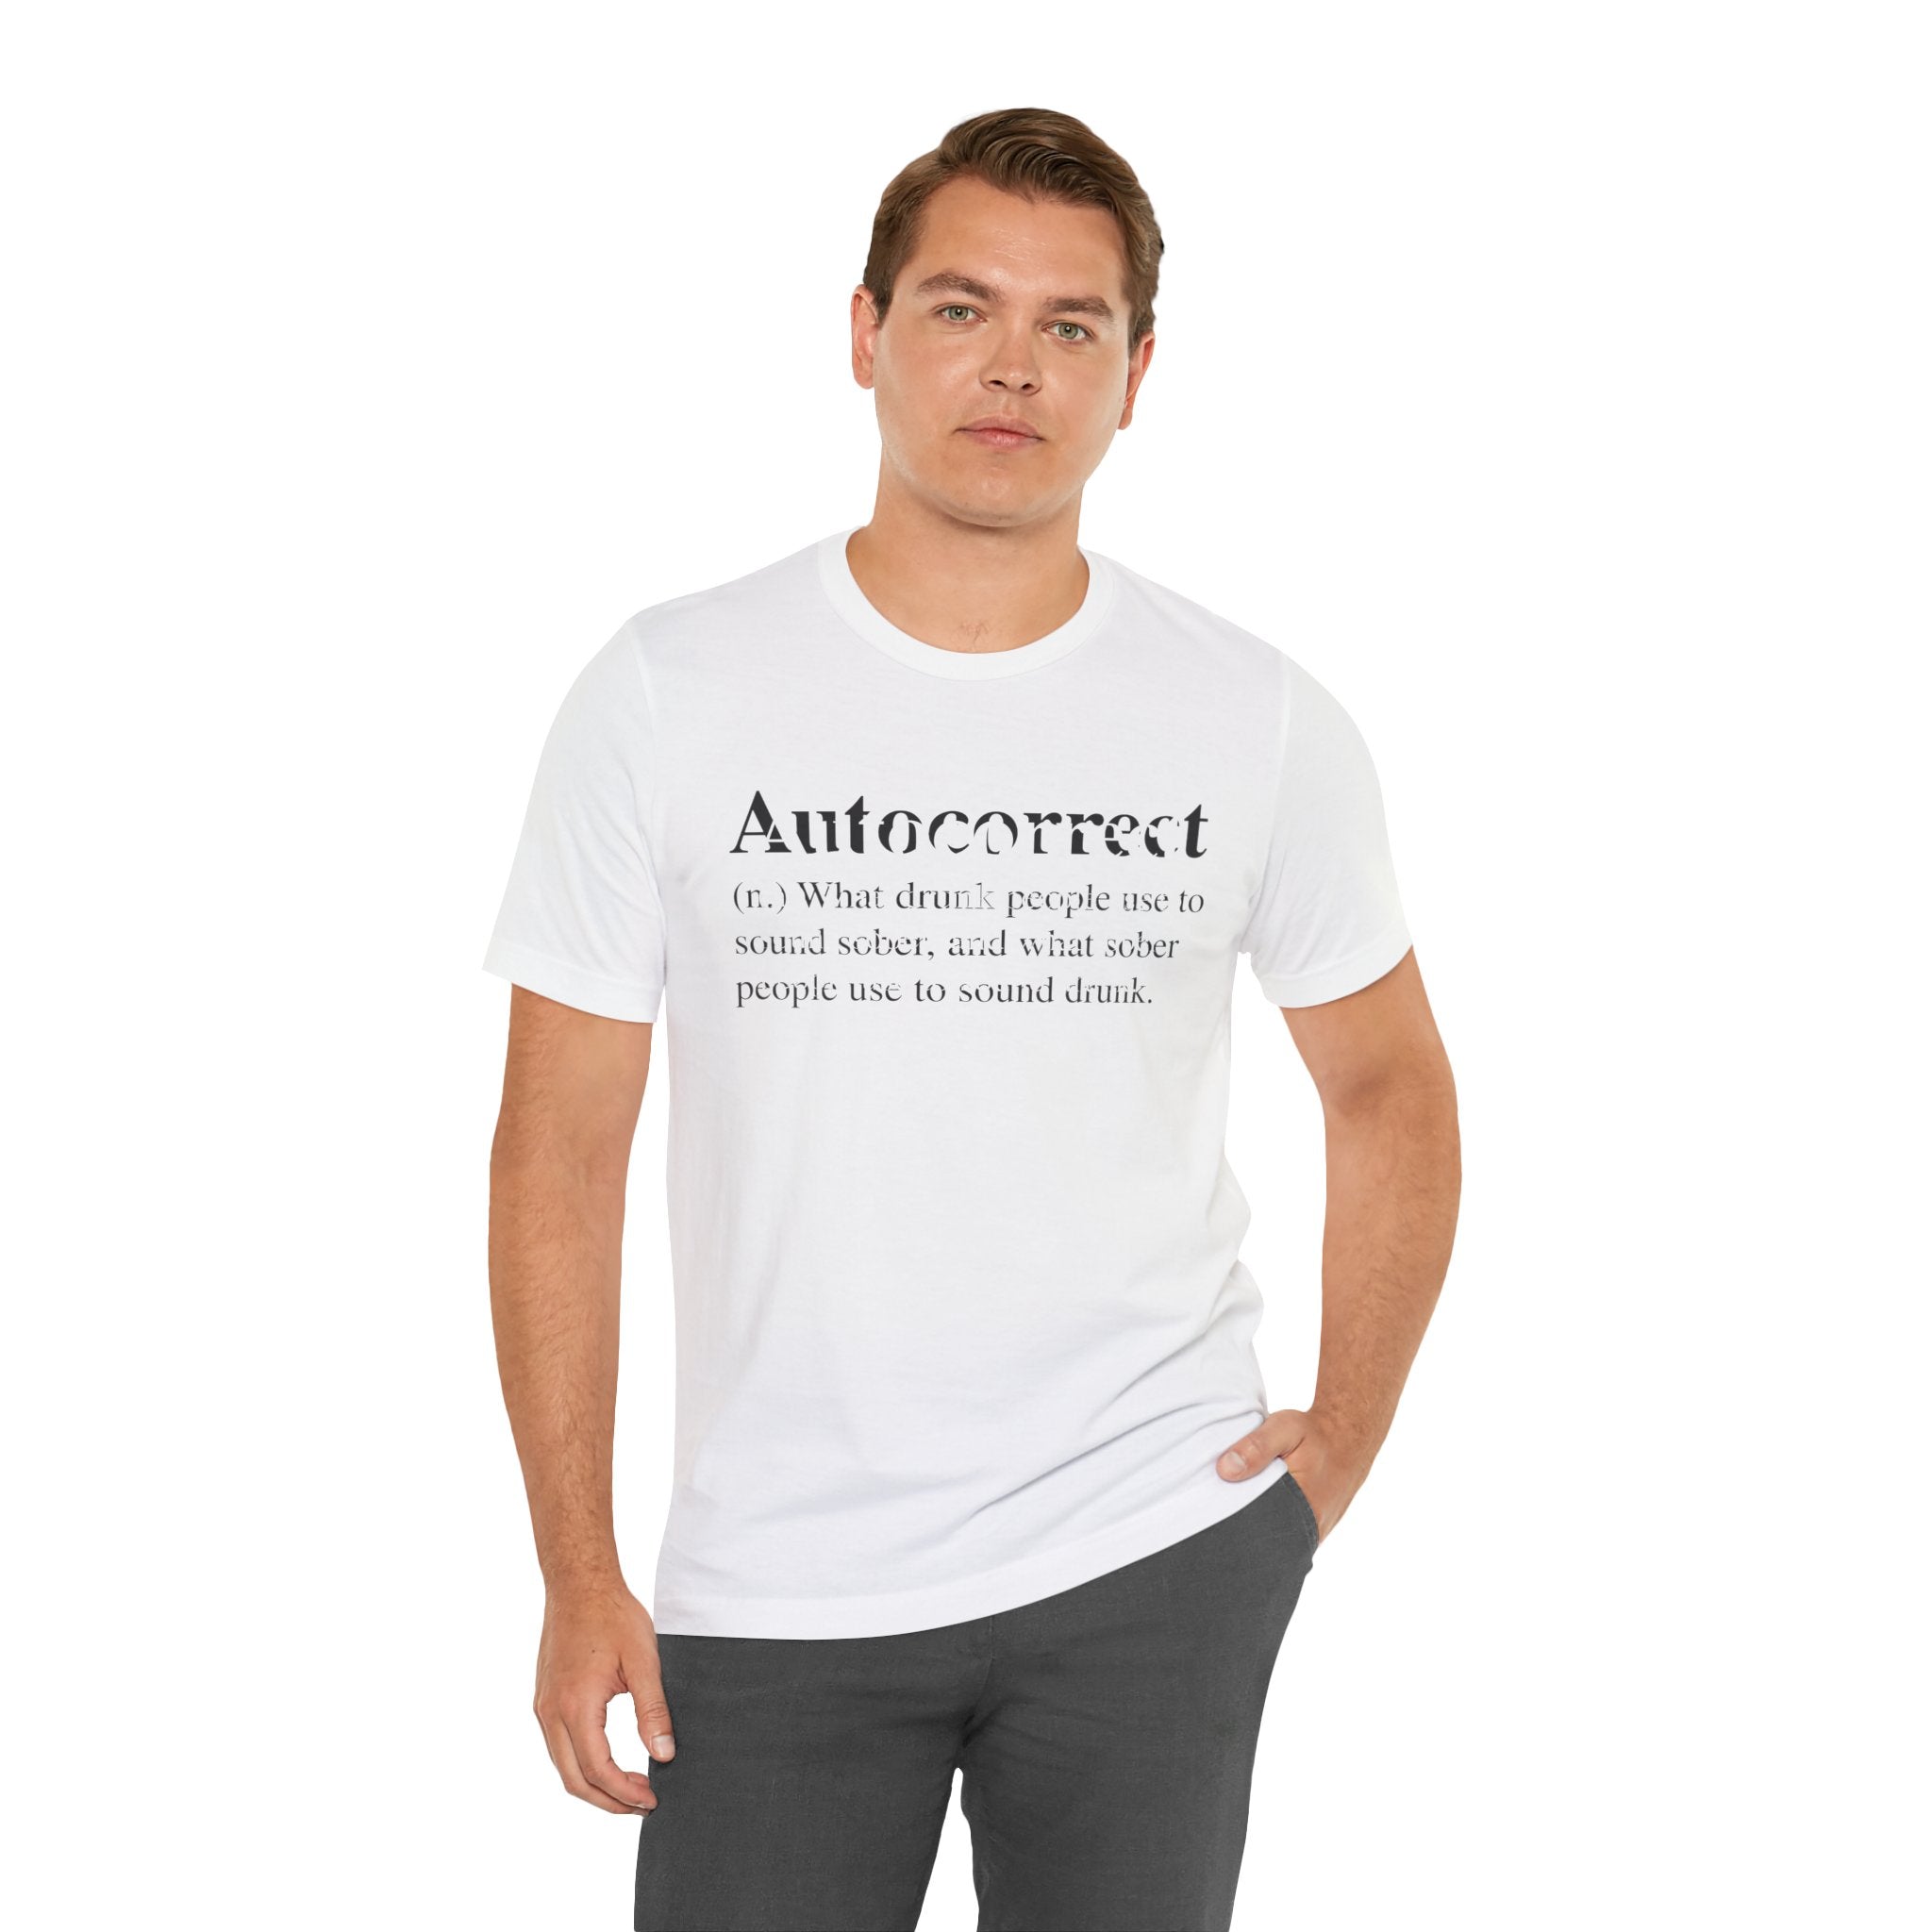 Man in a white Autocorrect T-Shirt with a humorous quote about autocorrect, standing against a white background.